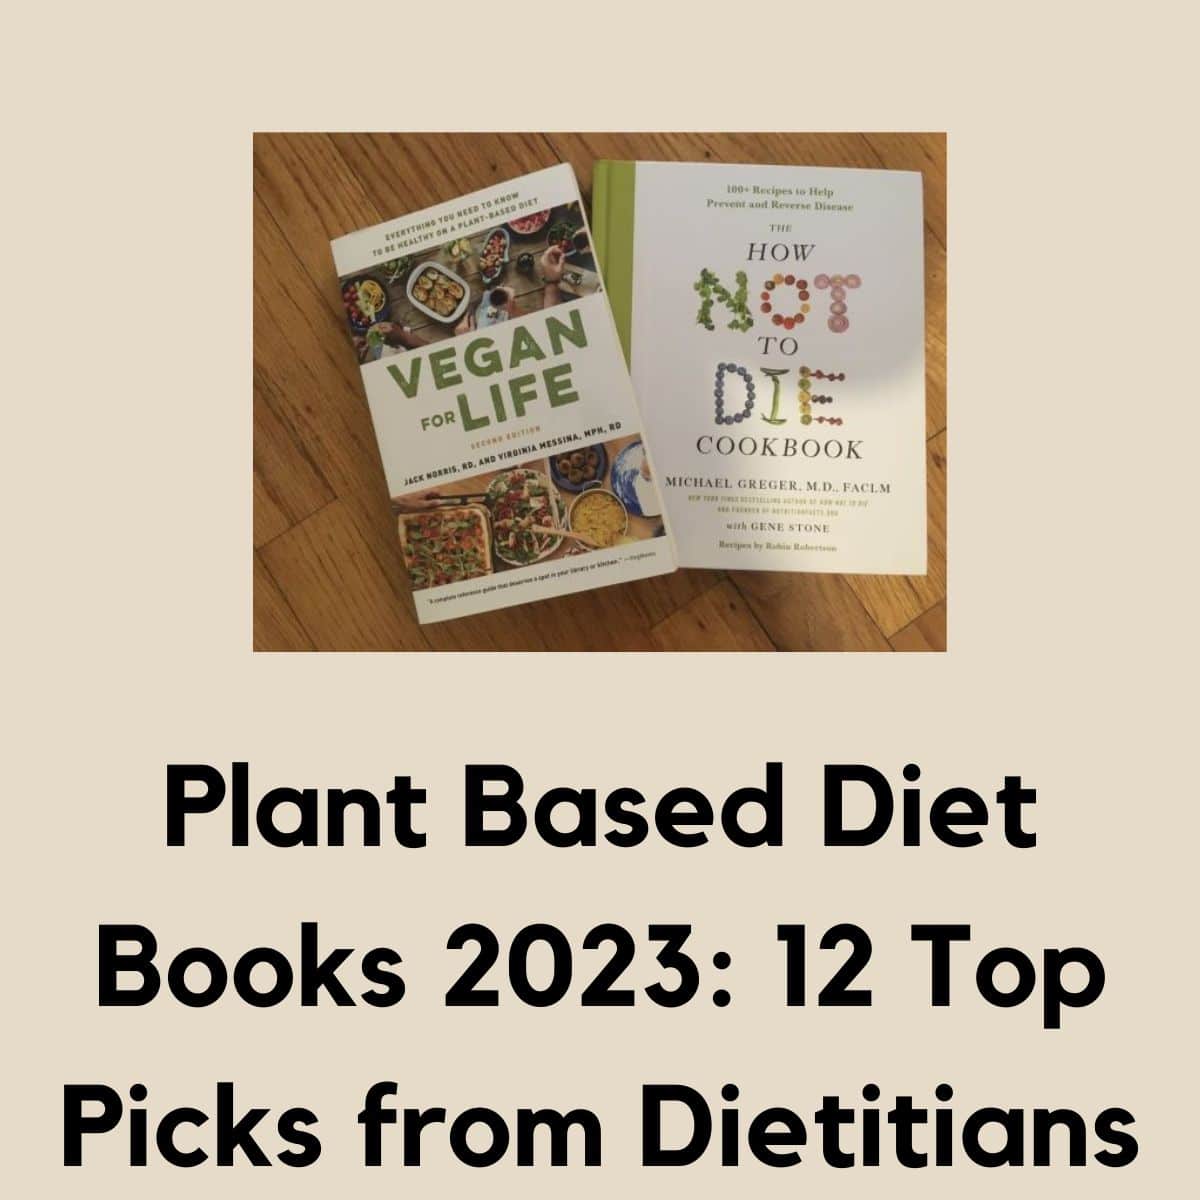 Title reads: Plant Based Diet Books 2023: 12 Top Picks from Dietitians. The is a picture of the book "Vegan For Life" and "How not to die cookbook."